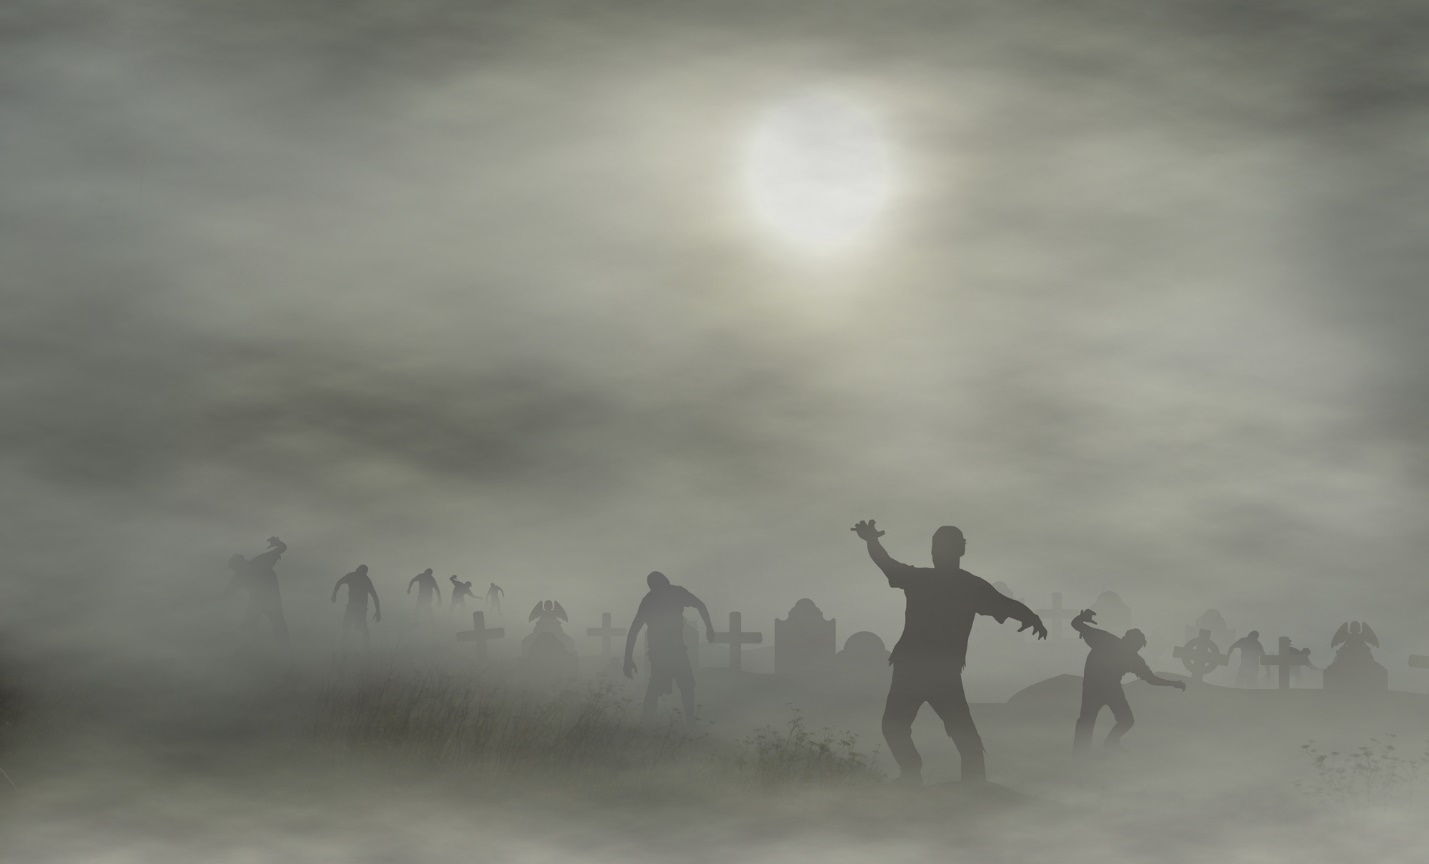 A group of people running in the fog

Description automatically generated with medium confidence